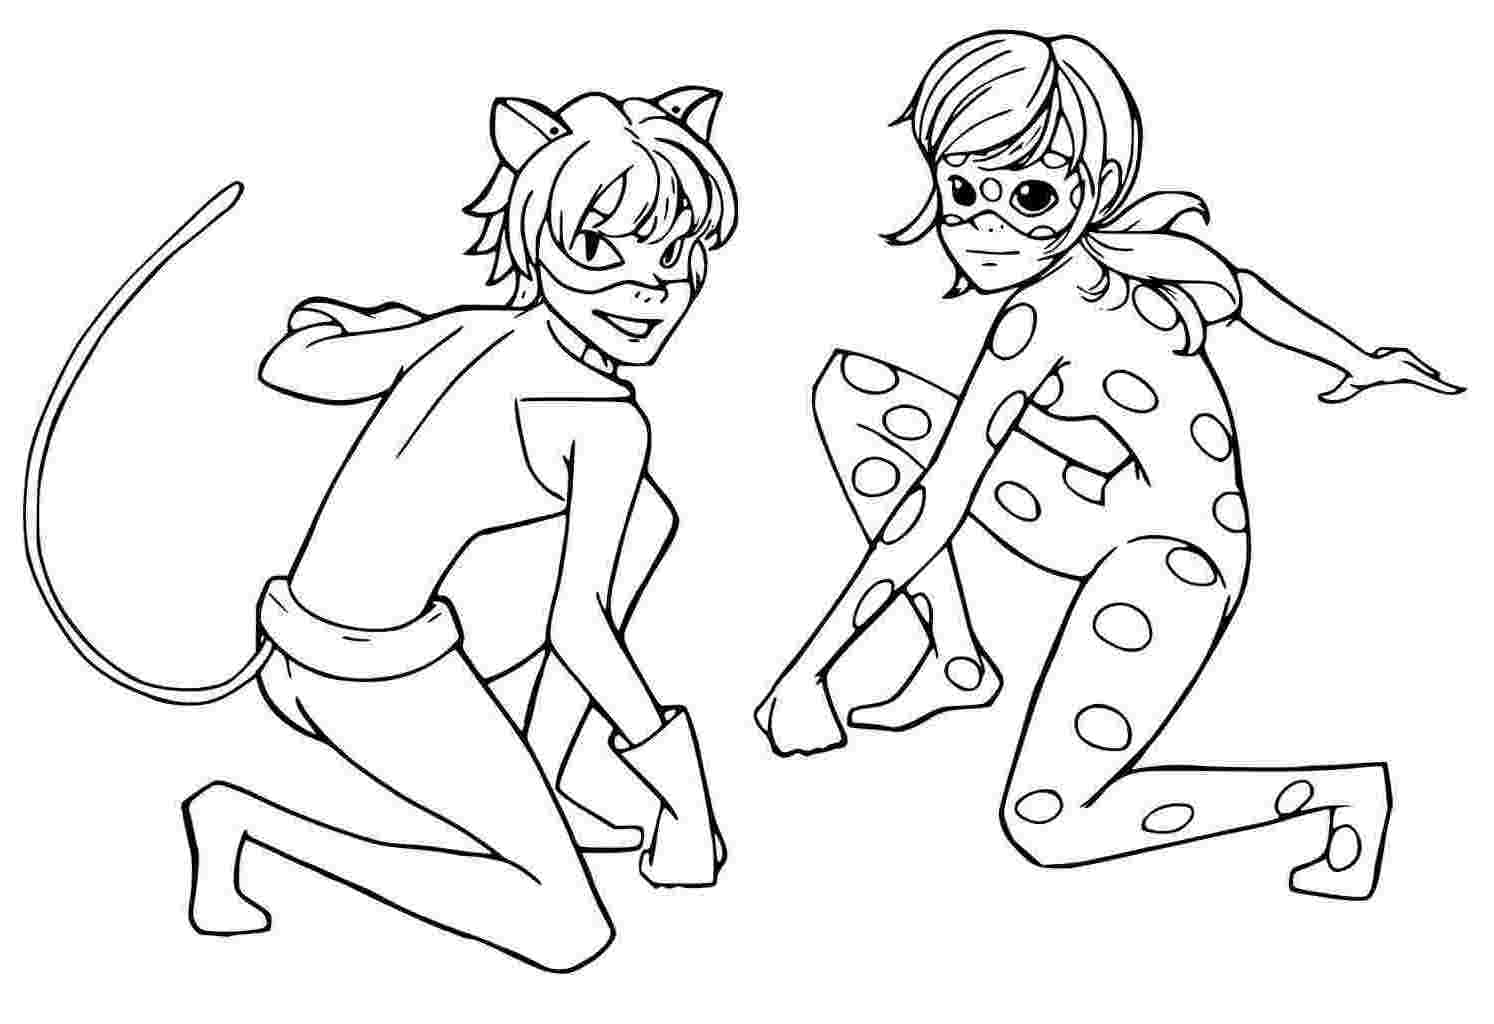 Miraculous Tales Of Ladybug & Cat Noir Coloring Pages Coloring Home